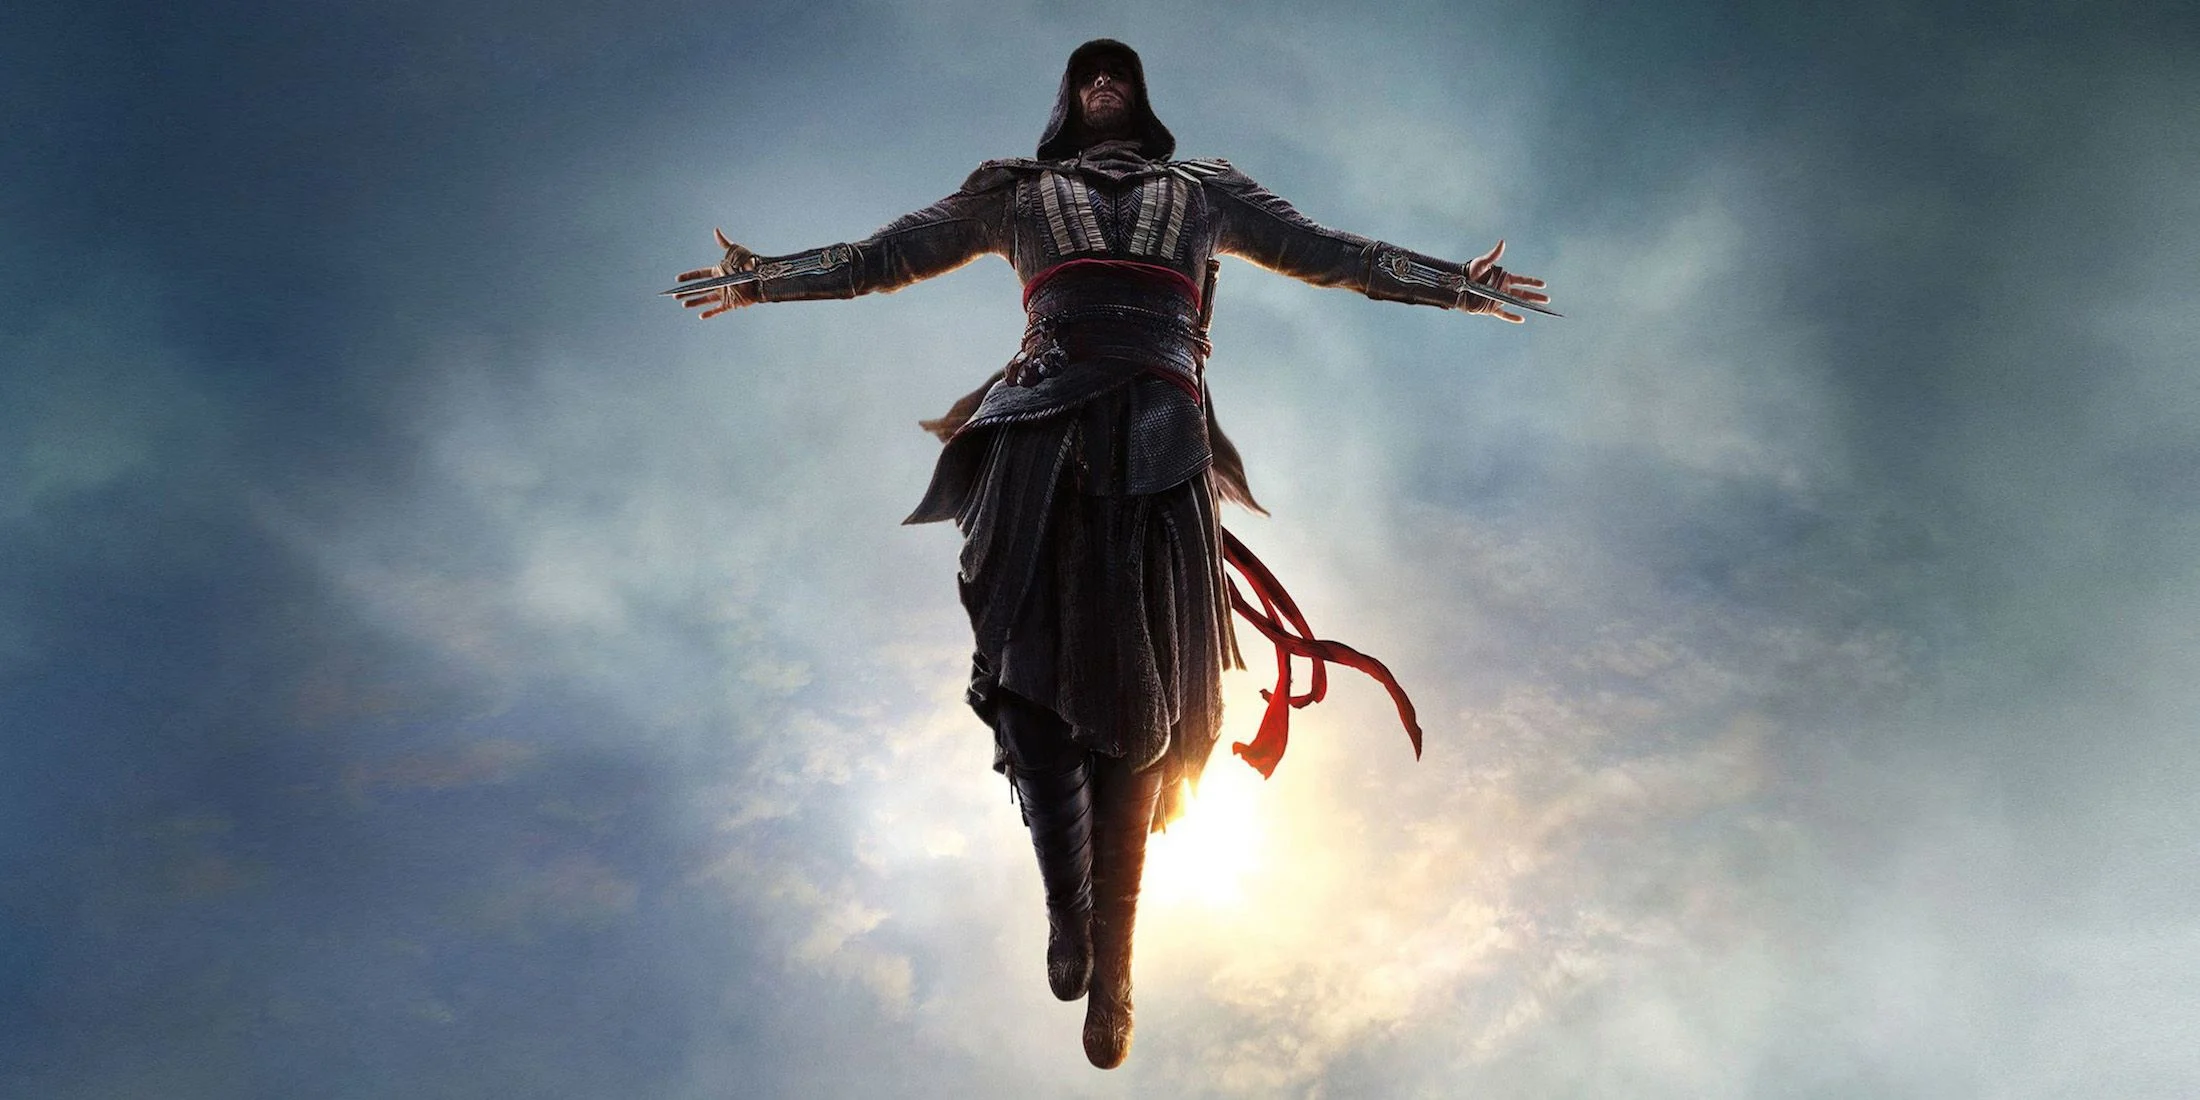 Michael Fassbender doing the leap in Assassin's Creed